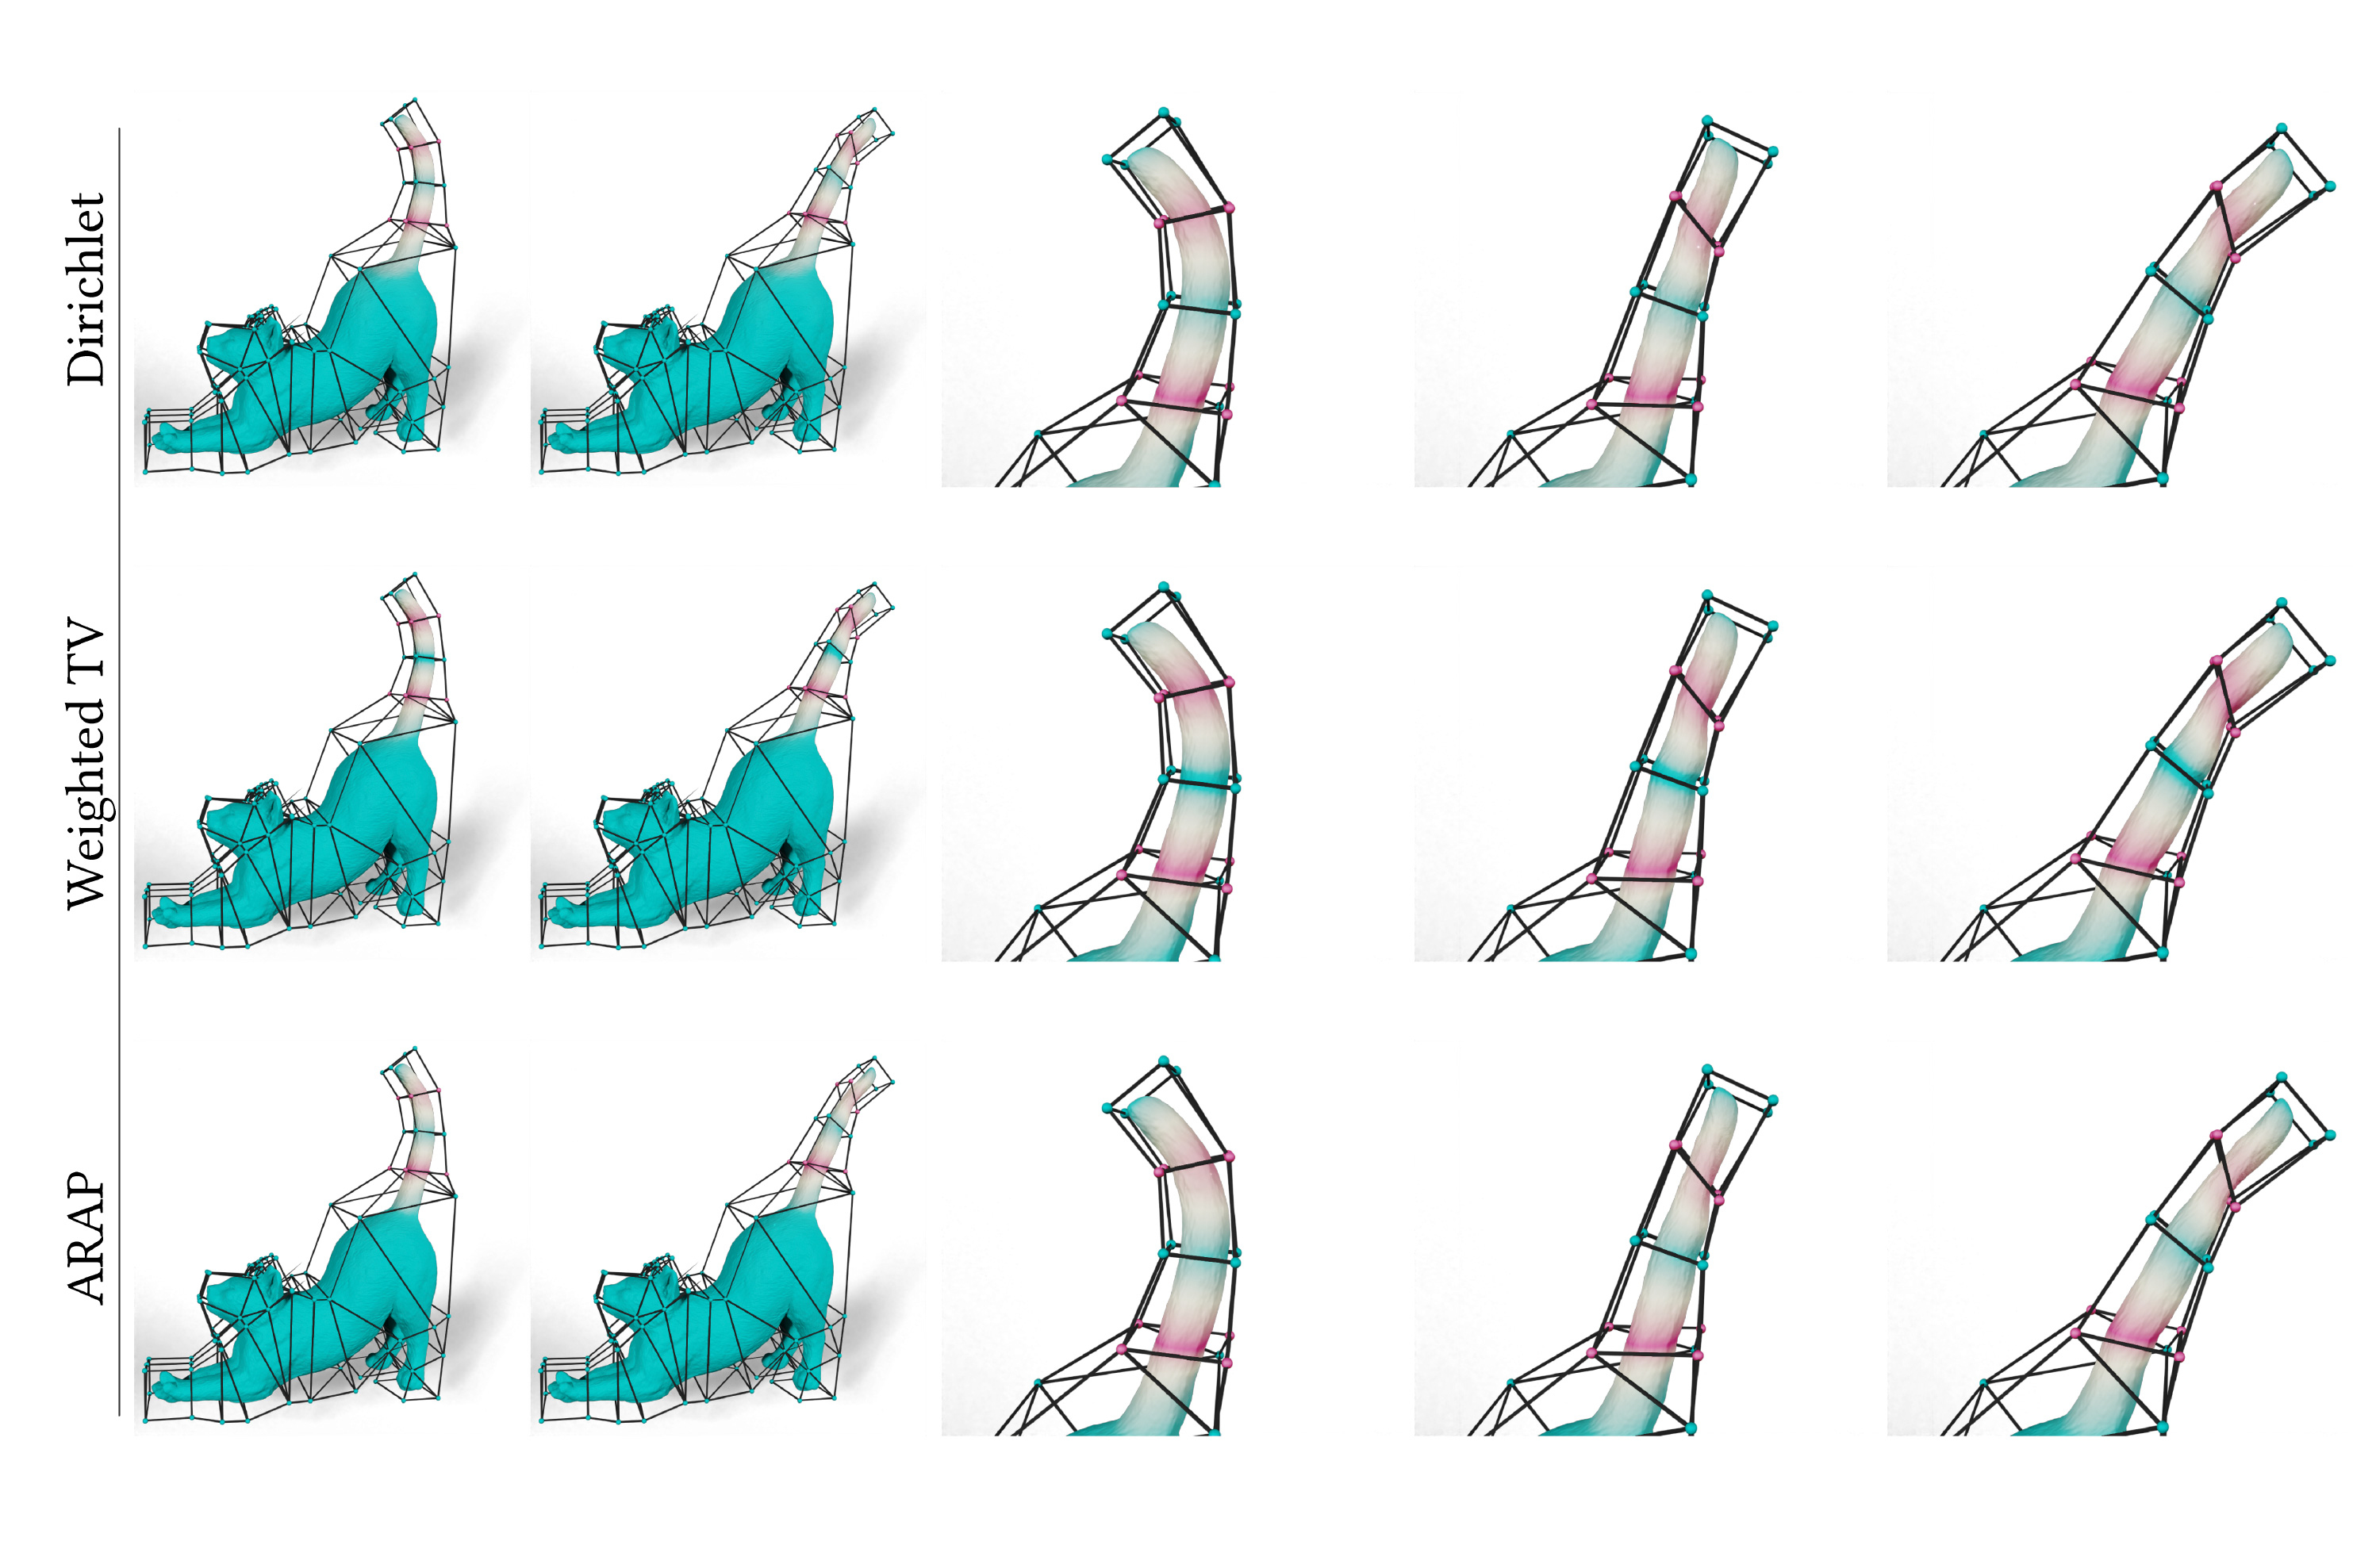 MIT researchers have introduced a versatile technique that gives an animator the flexibility to see how different mathematical functions deform complex 2D or 3D characters. The new technique lets animators choose the function that best fits their vision for the animation.